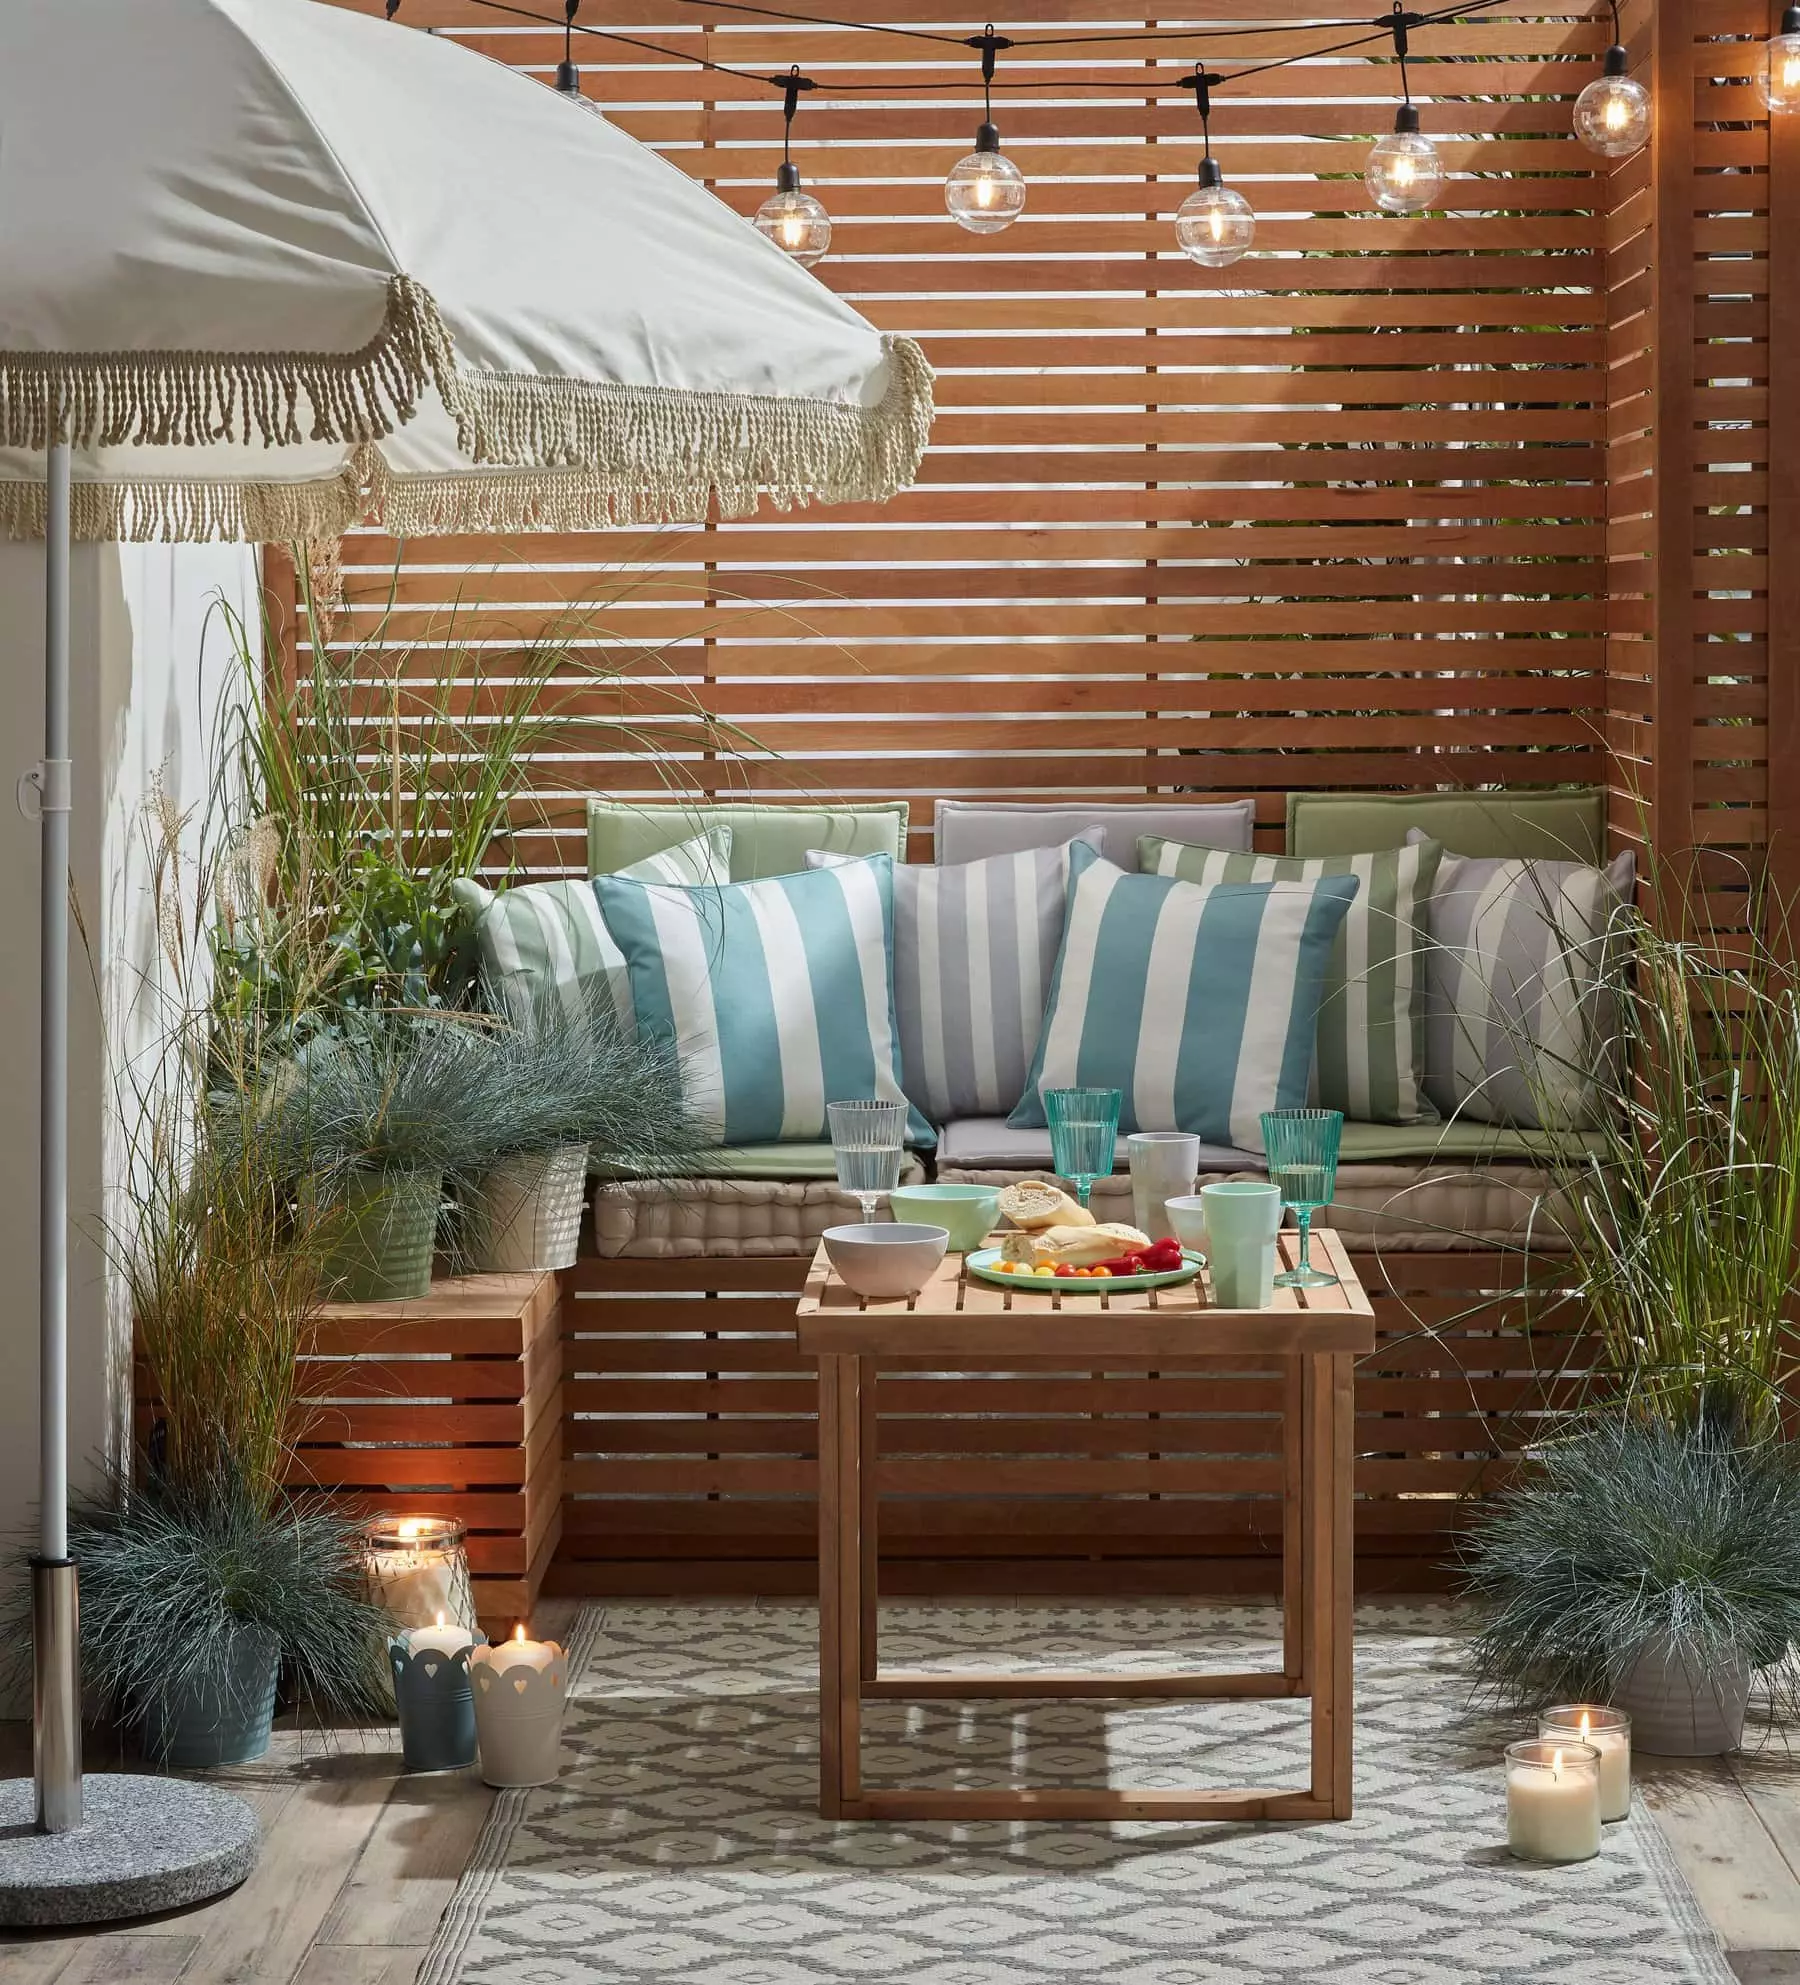 Panelled fence with striped cushions, pallet furniture, outdoor rug, and tasseled parasol in the garden